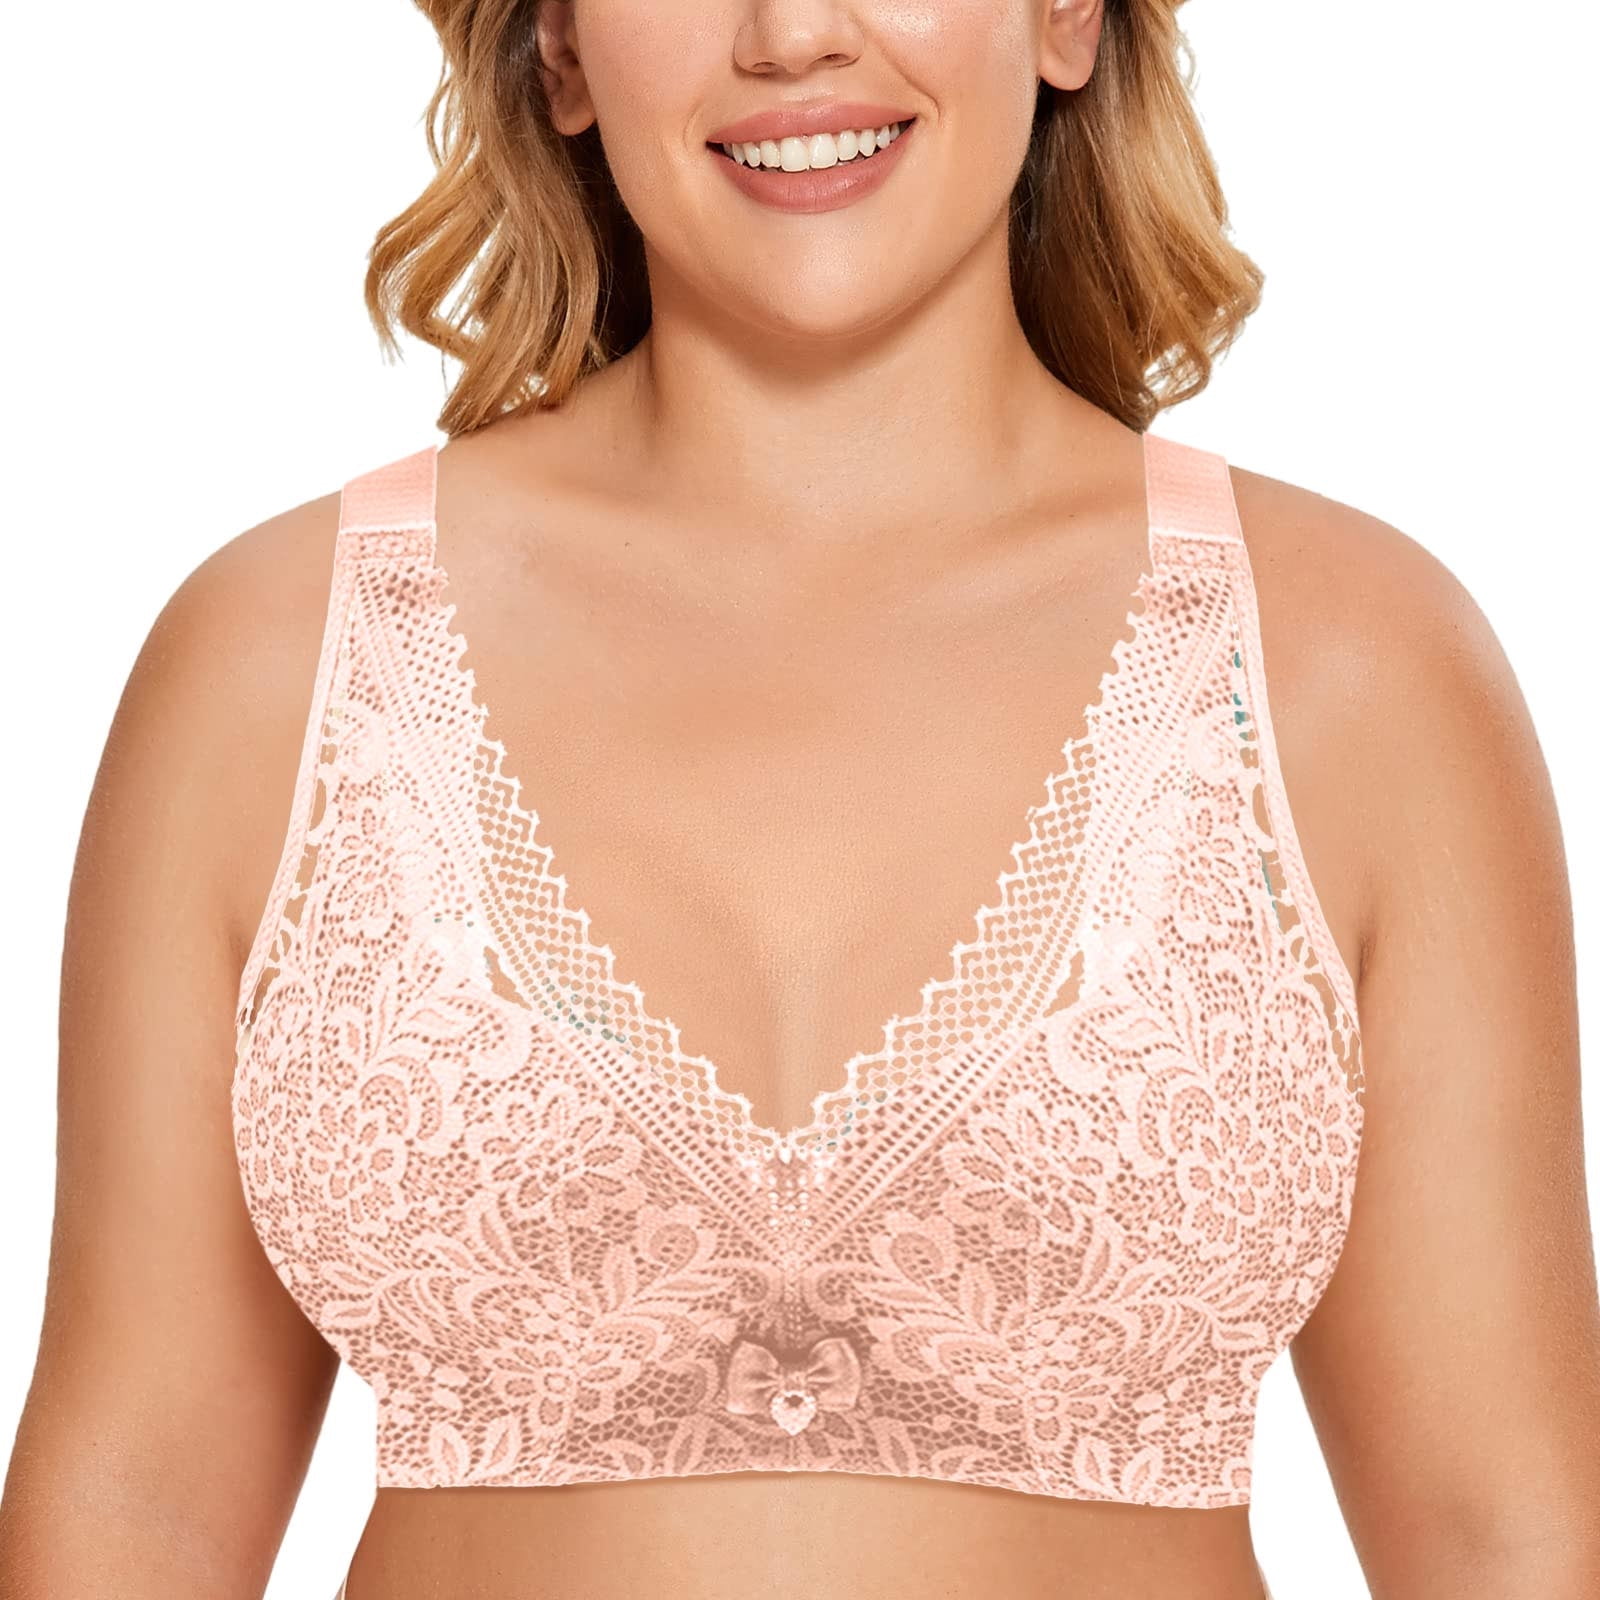 TOWED22 Bras,Women's Lace Full Coverage Bra Plus Size Underwire